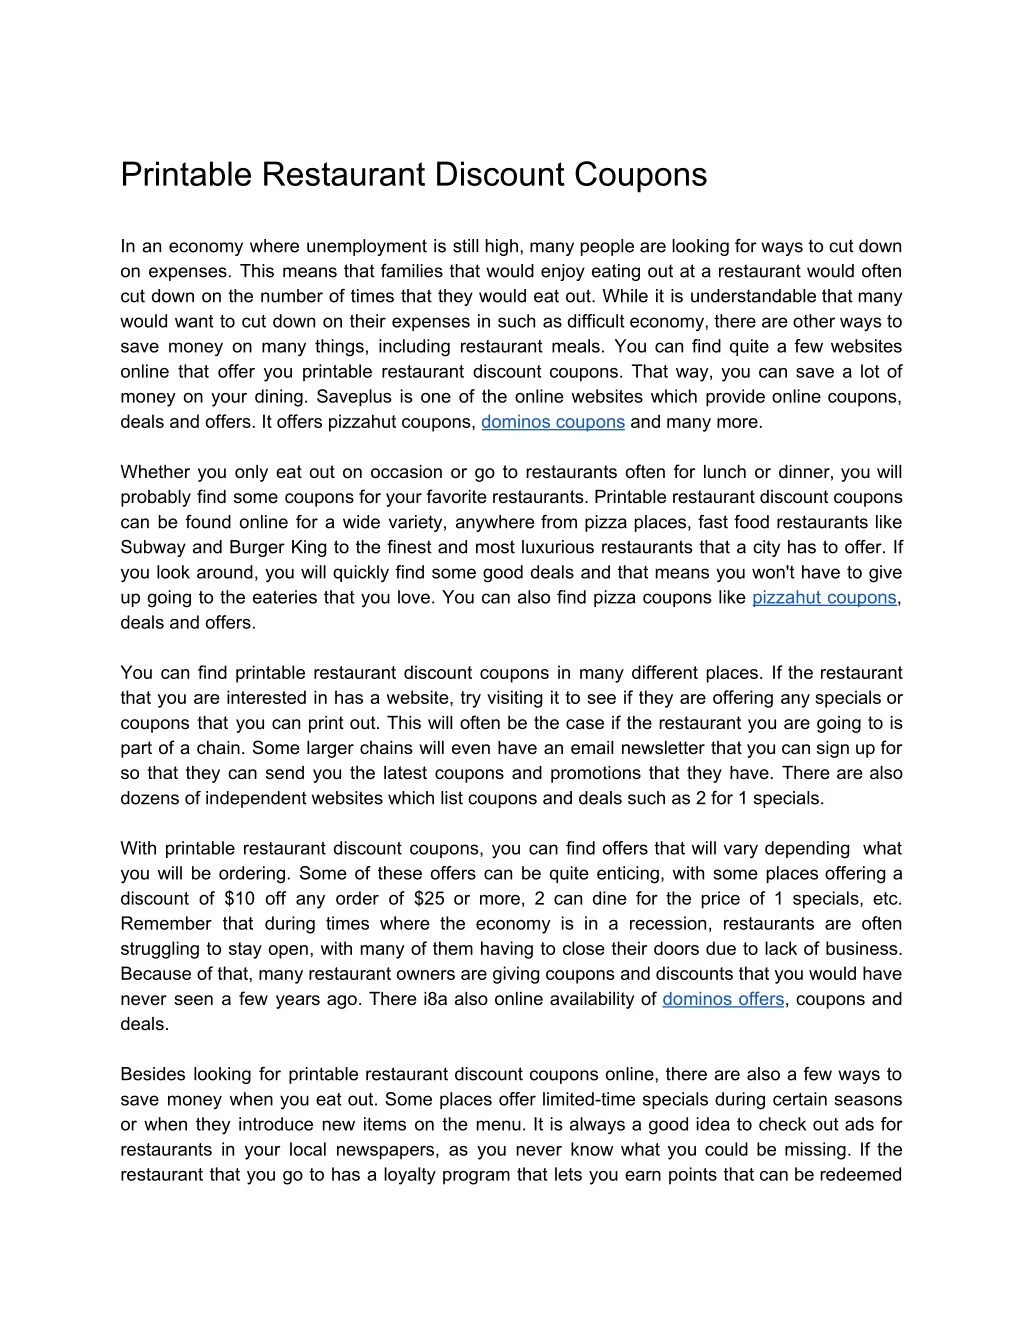 printable restaurant discount coupons